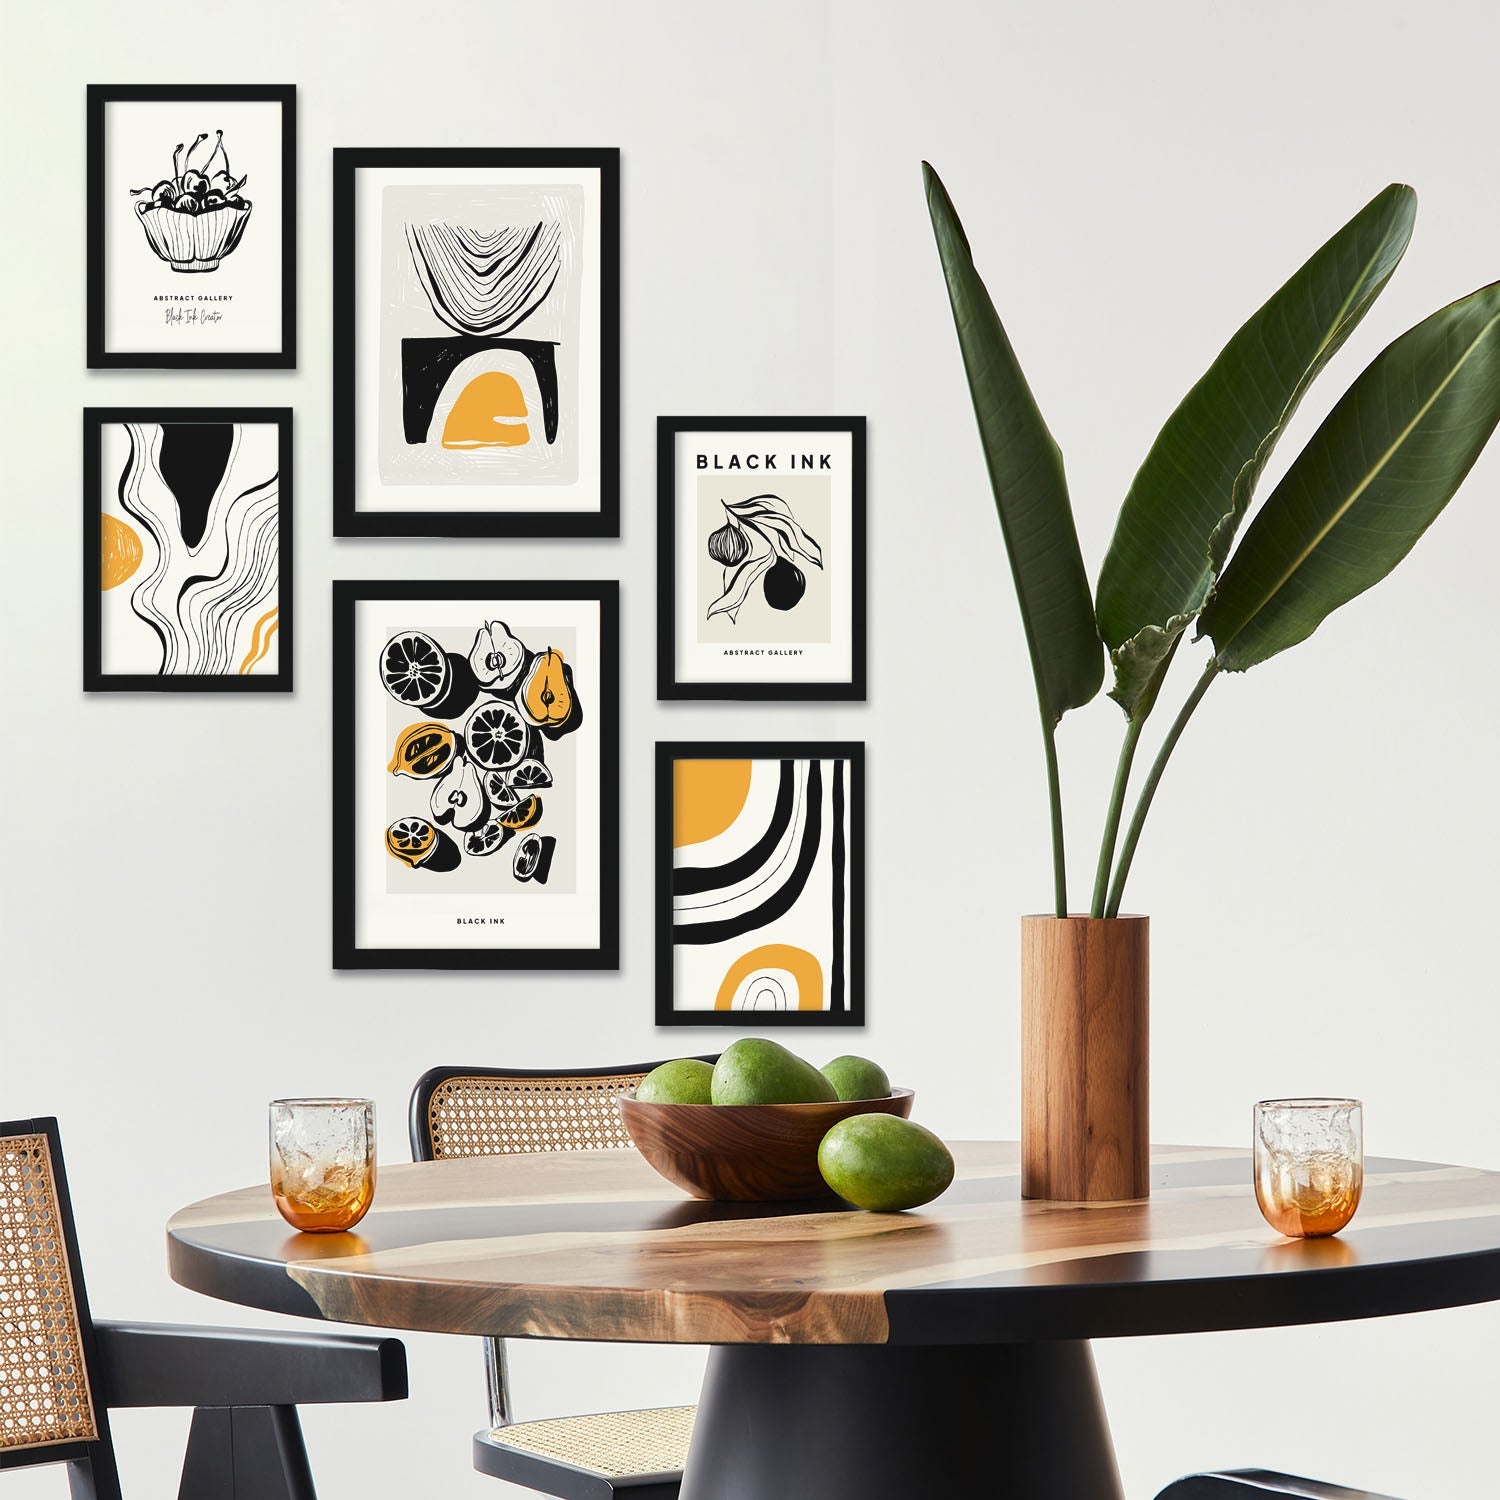 Thick Black Ink Posters. Fruits. Artistic and Abstract Aesthetic-Artwork-Nacnic-Nacnic Estudio SL